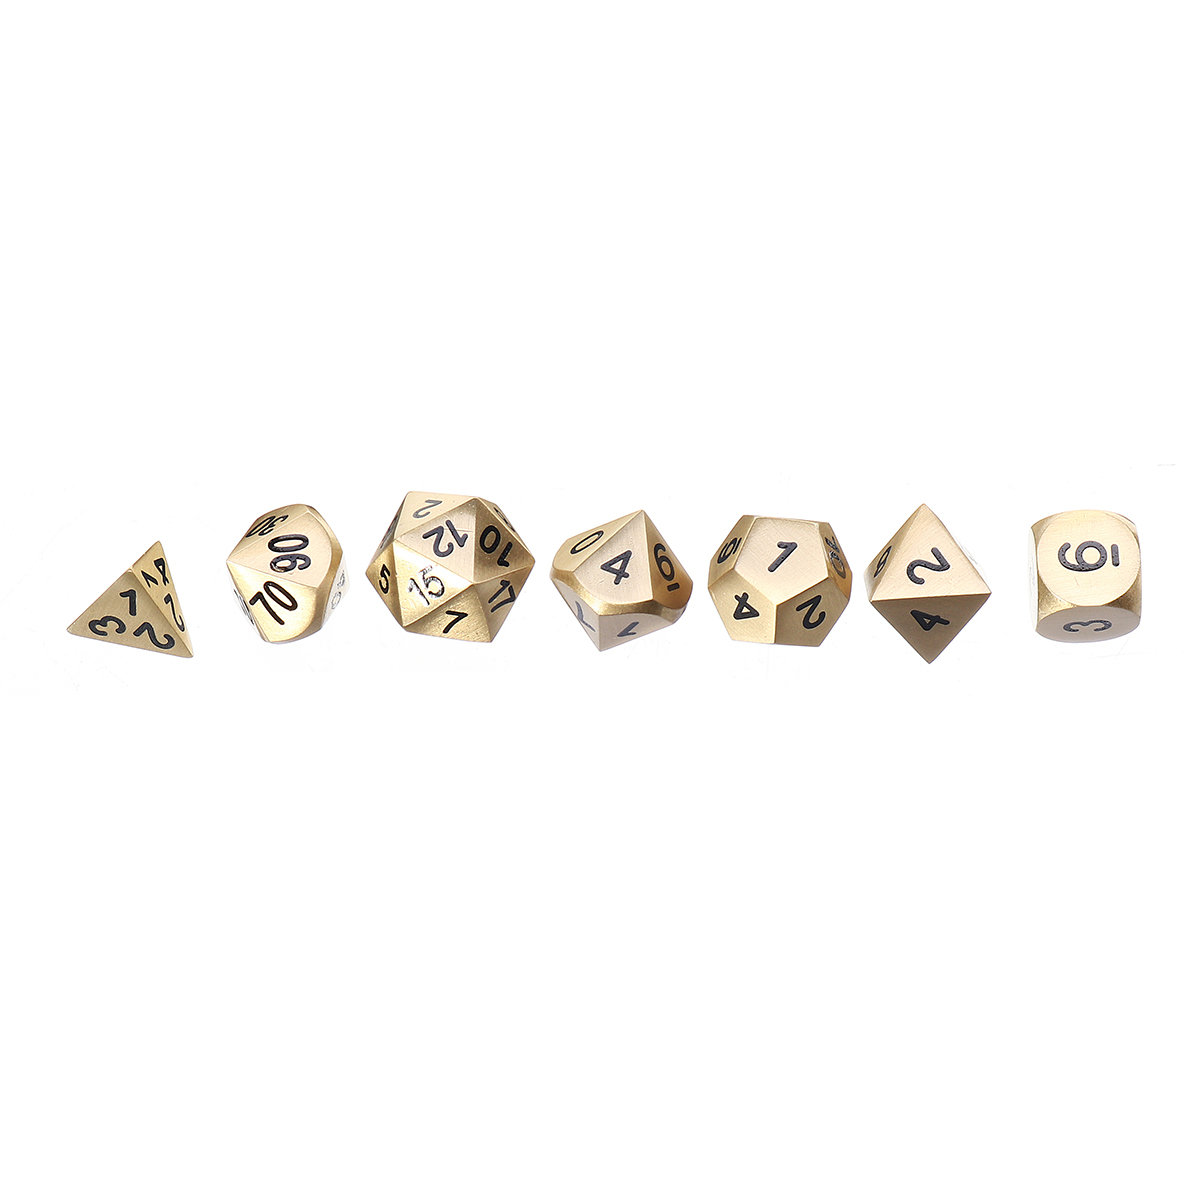 Pure-Copper-Polyhedral-Dices-Set-Metal-Role-Playing-Game-Dice-Gadget-for-Dungeons-Dragon-Games-Gift-1608120-7